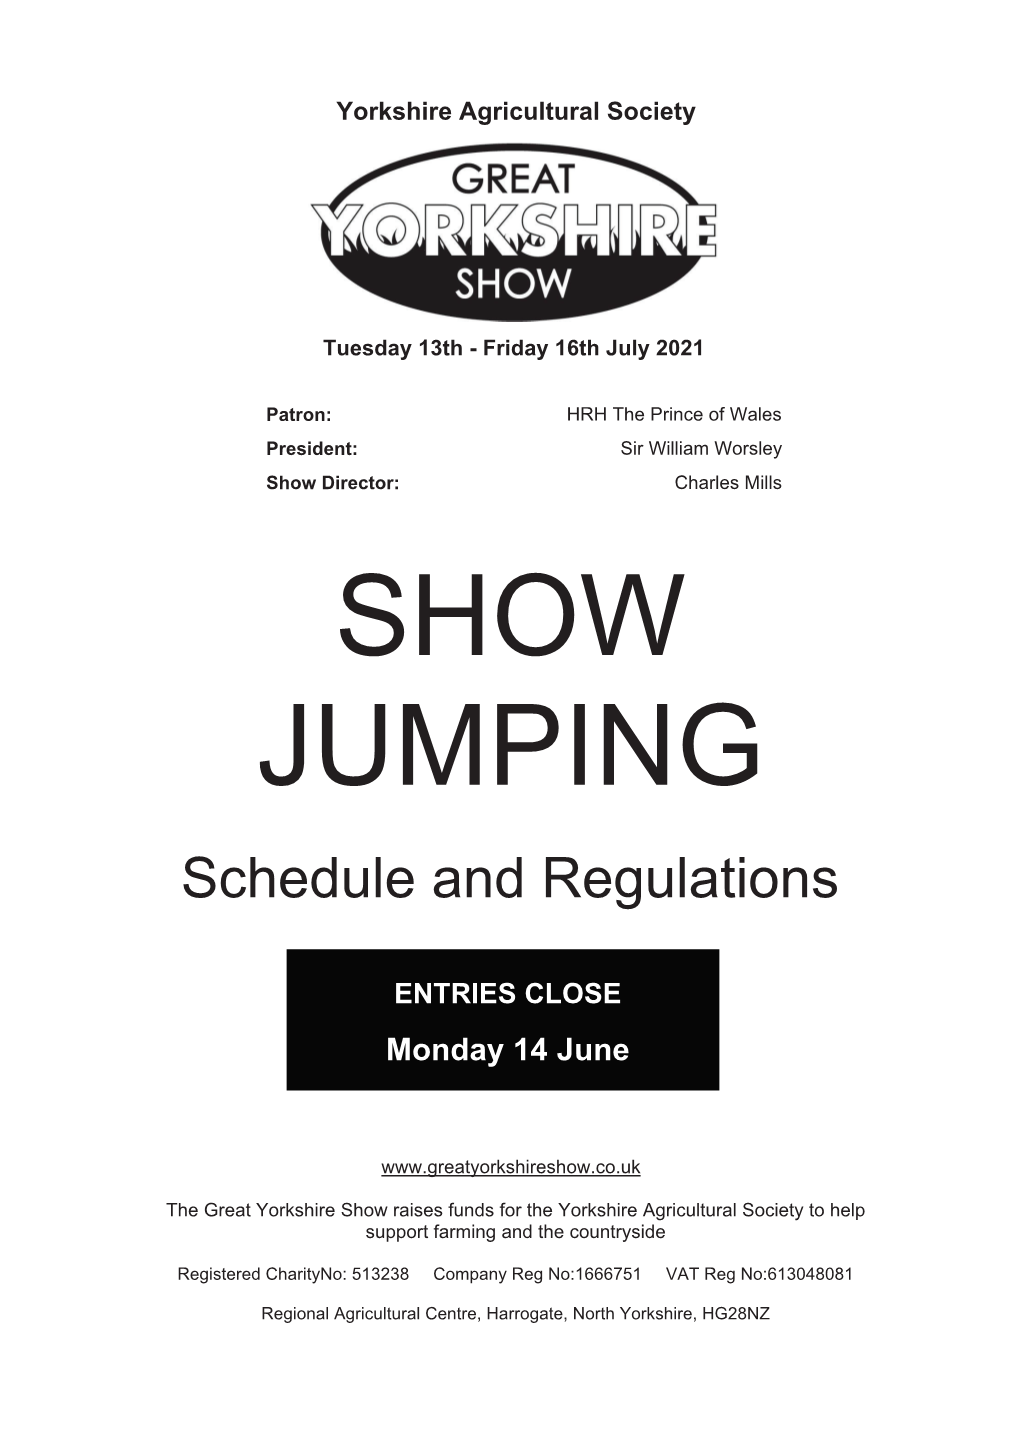 SHOW JUMPING Schedule and Regulations